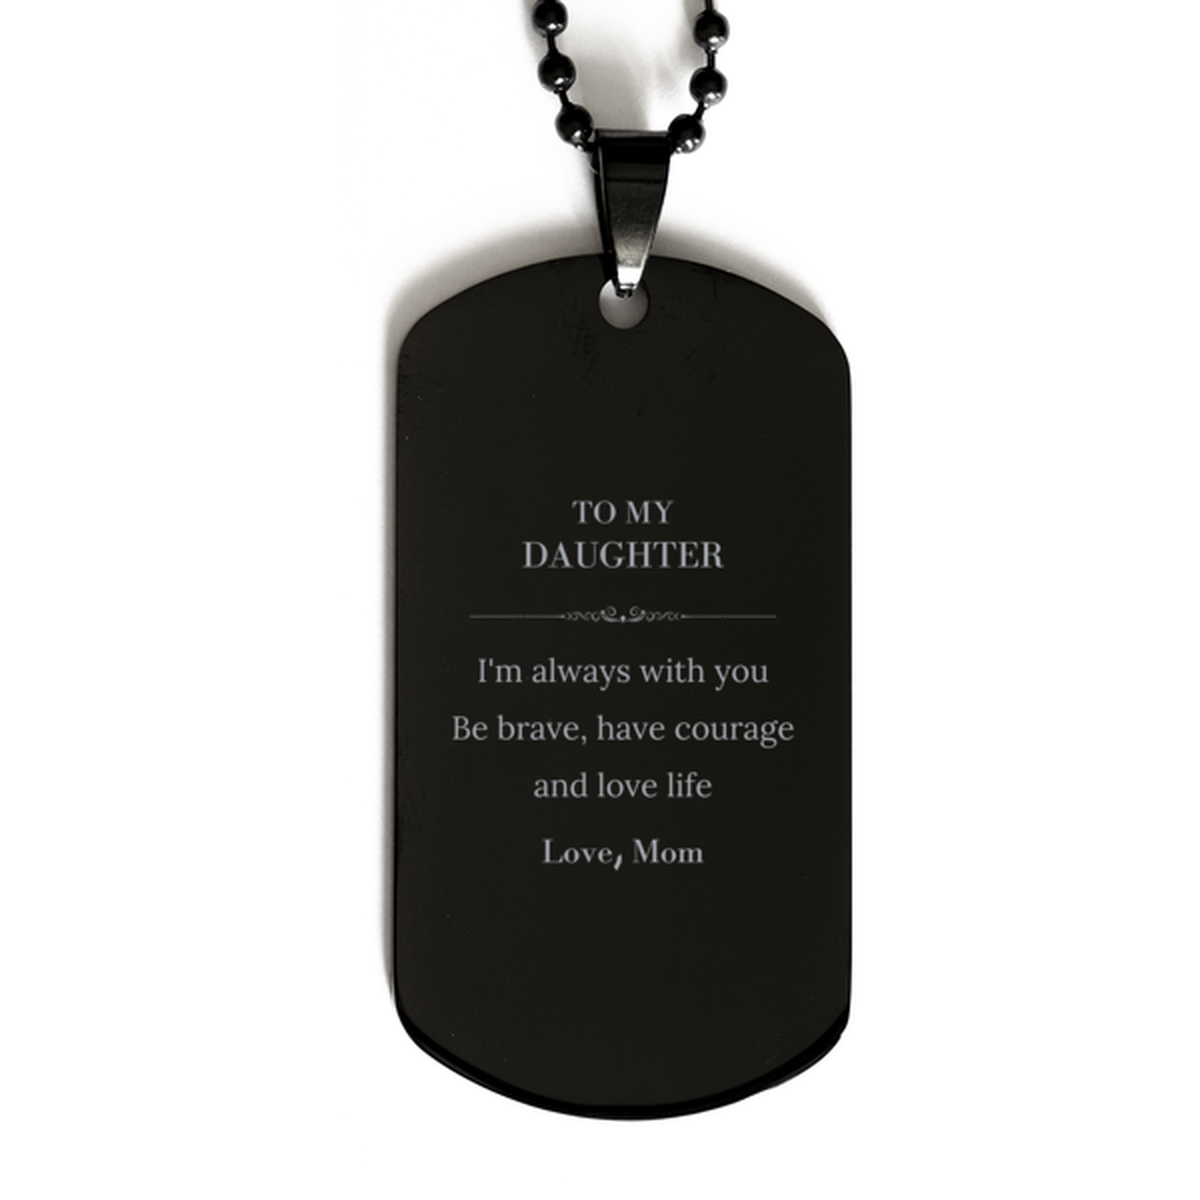 To My Daughter Gifts from Mom, Unique Black Dog Tag Inspirational Christmas Birthday Graduation Gifts for Daughter I'm always with you. Be brave, have courage and love life. Love, Mom